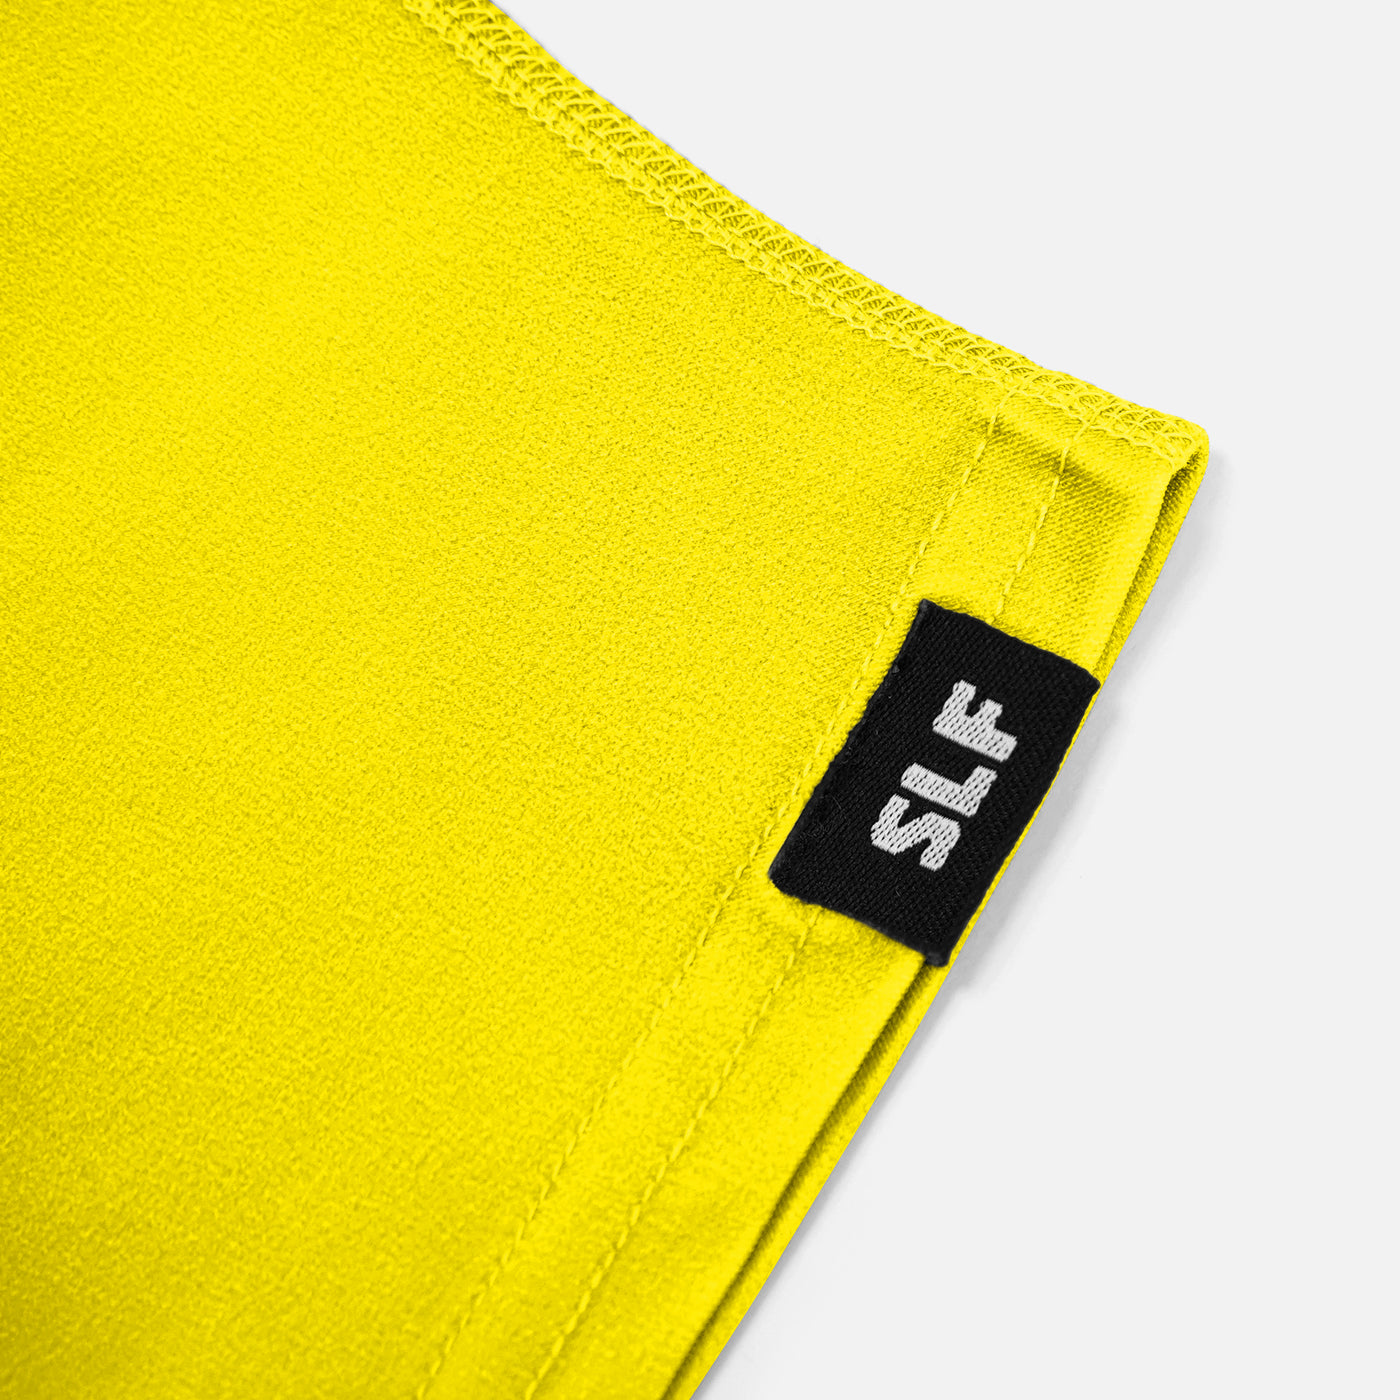 Hue Yellow Spats / Cleat Covers - Big